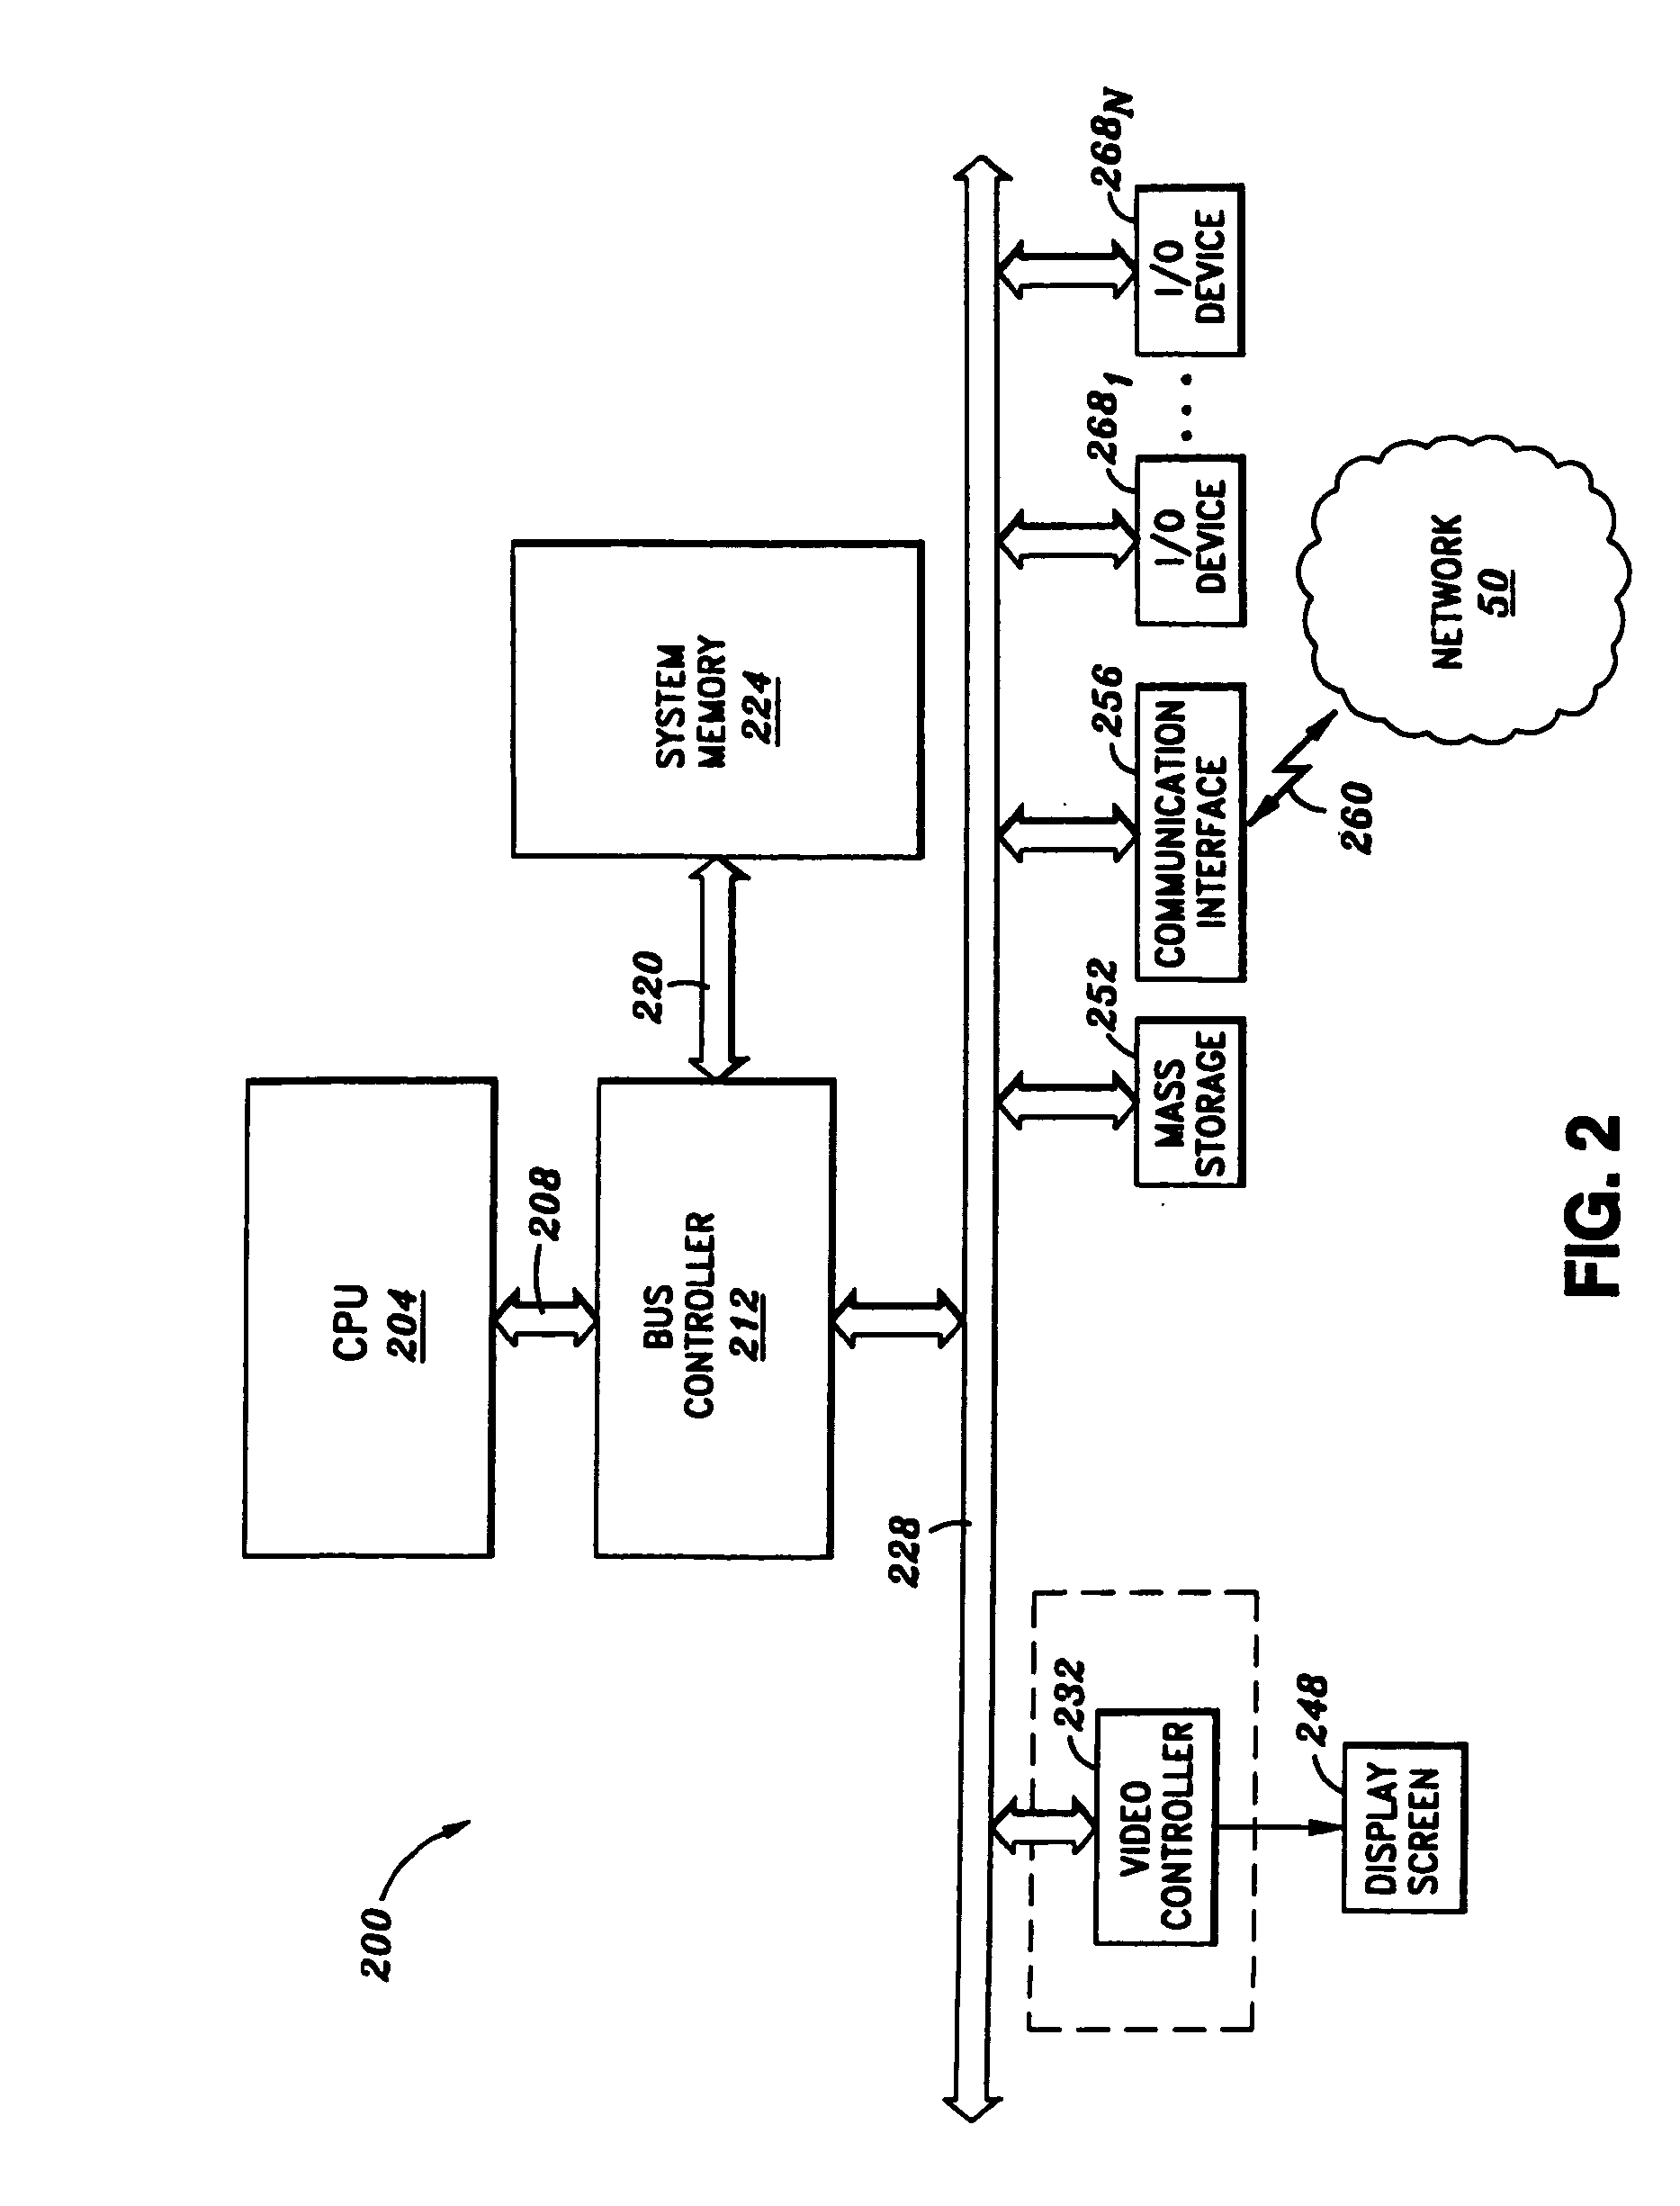 System and method for improving online search engine results